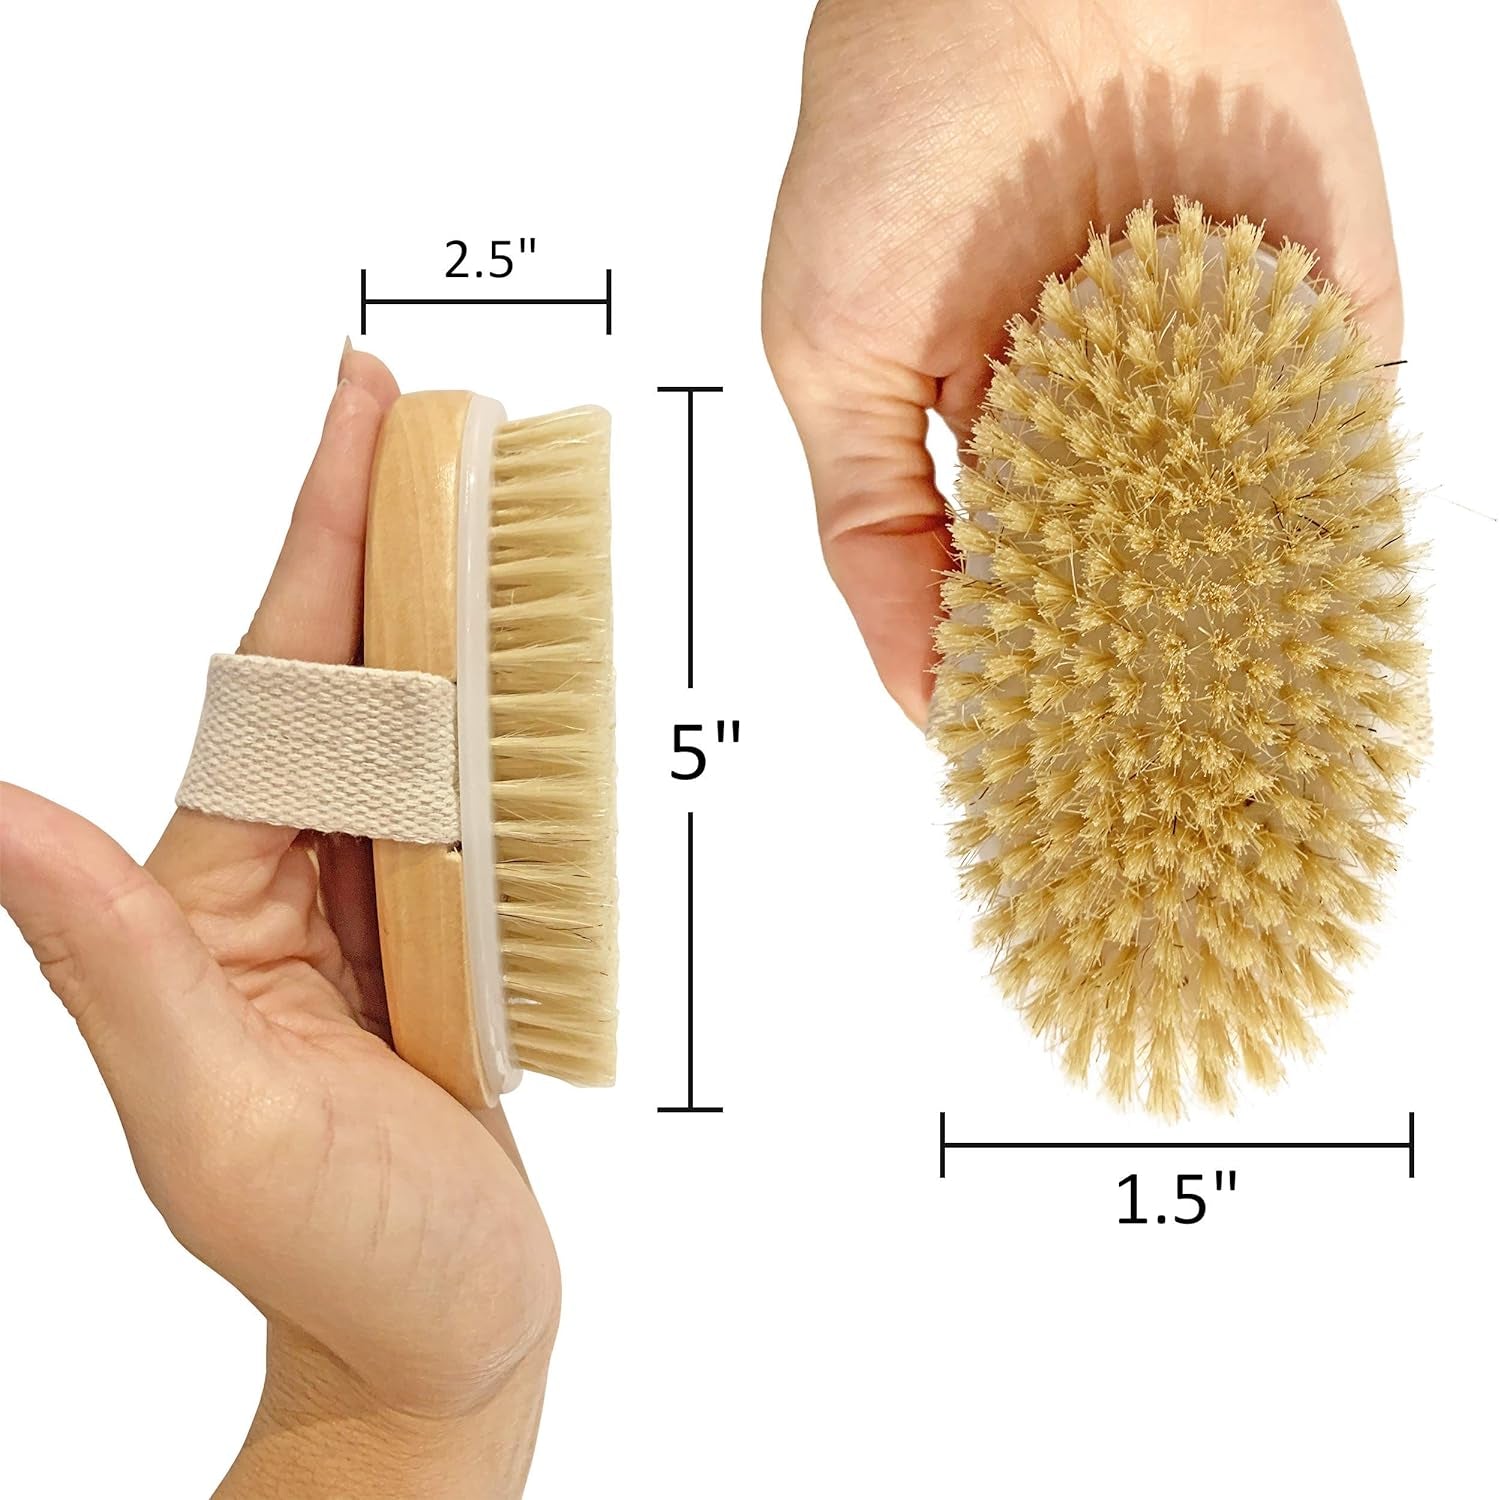 Wet and Dry Body Brush Exfoliator - Medium Soft Natural Bristle - Exfoliates Dead Skin - Slows Aging - Reduces Cellulite - Stimulates Lymph and Blood Flow and Increases Energy